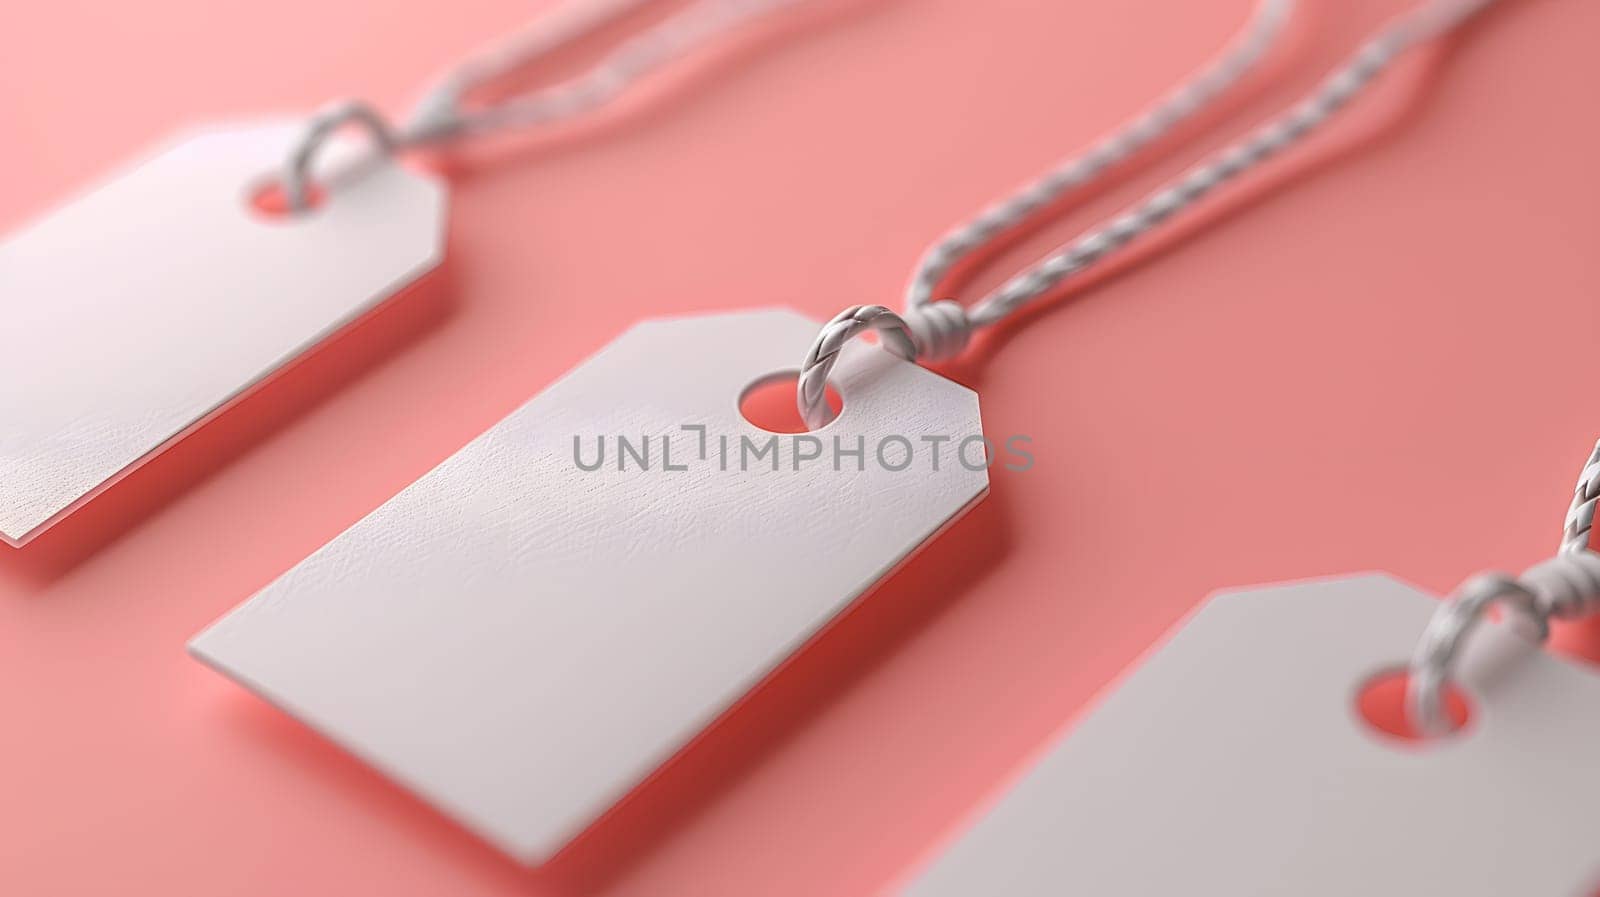 Three white rectangles made of wire are displayed on a vibrant pink surface. The tags are perfect for body jewelry or fashion accessories, contrasting with the magenta background